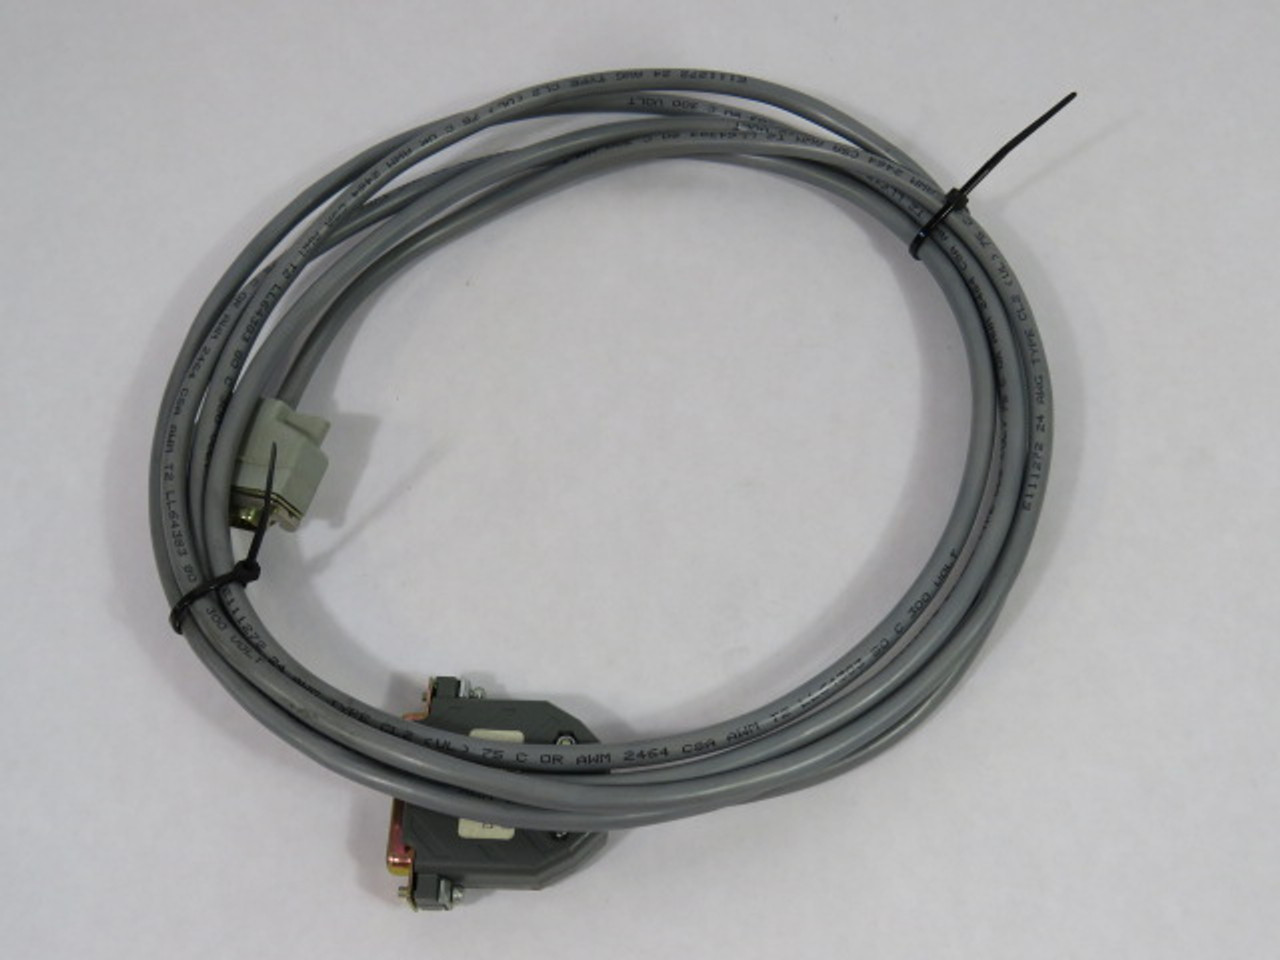 Quartech 8569-10 Communication Cable for Push Button to PLC-2 Control USED